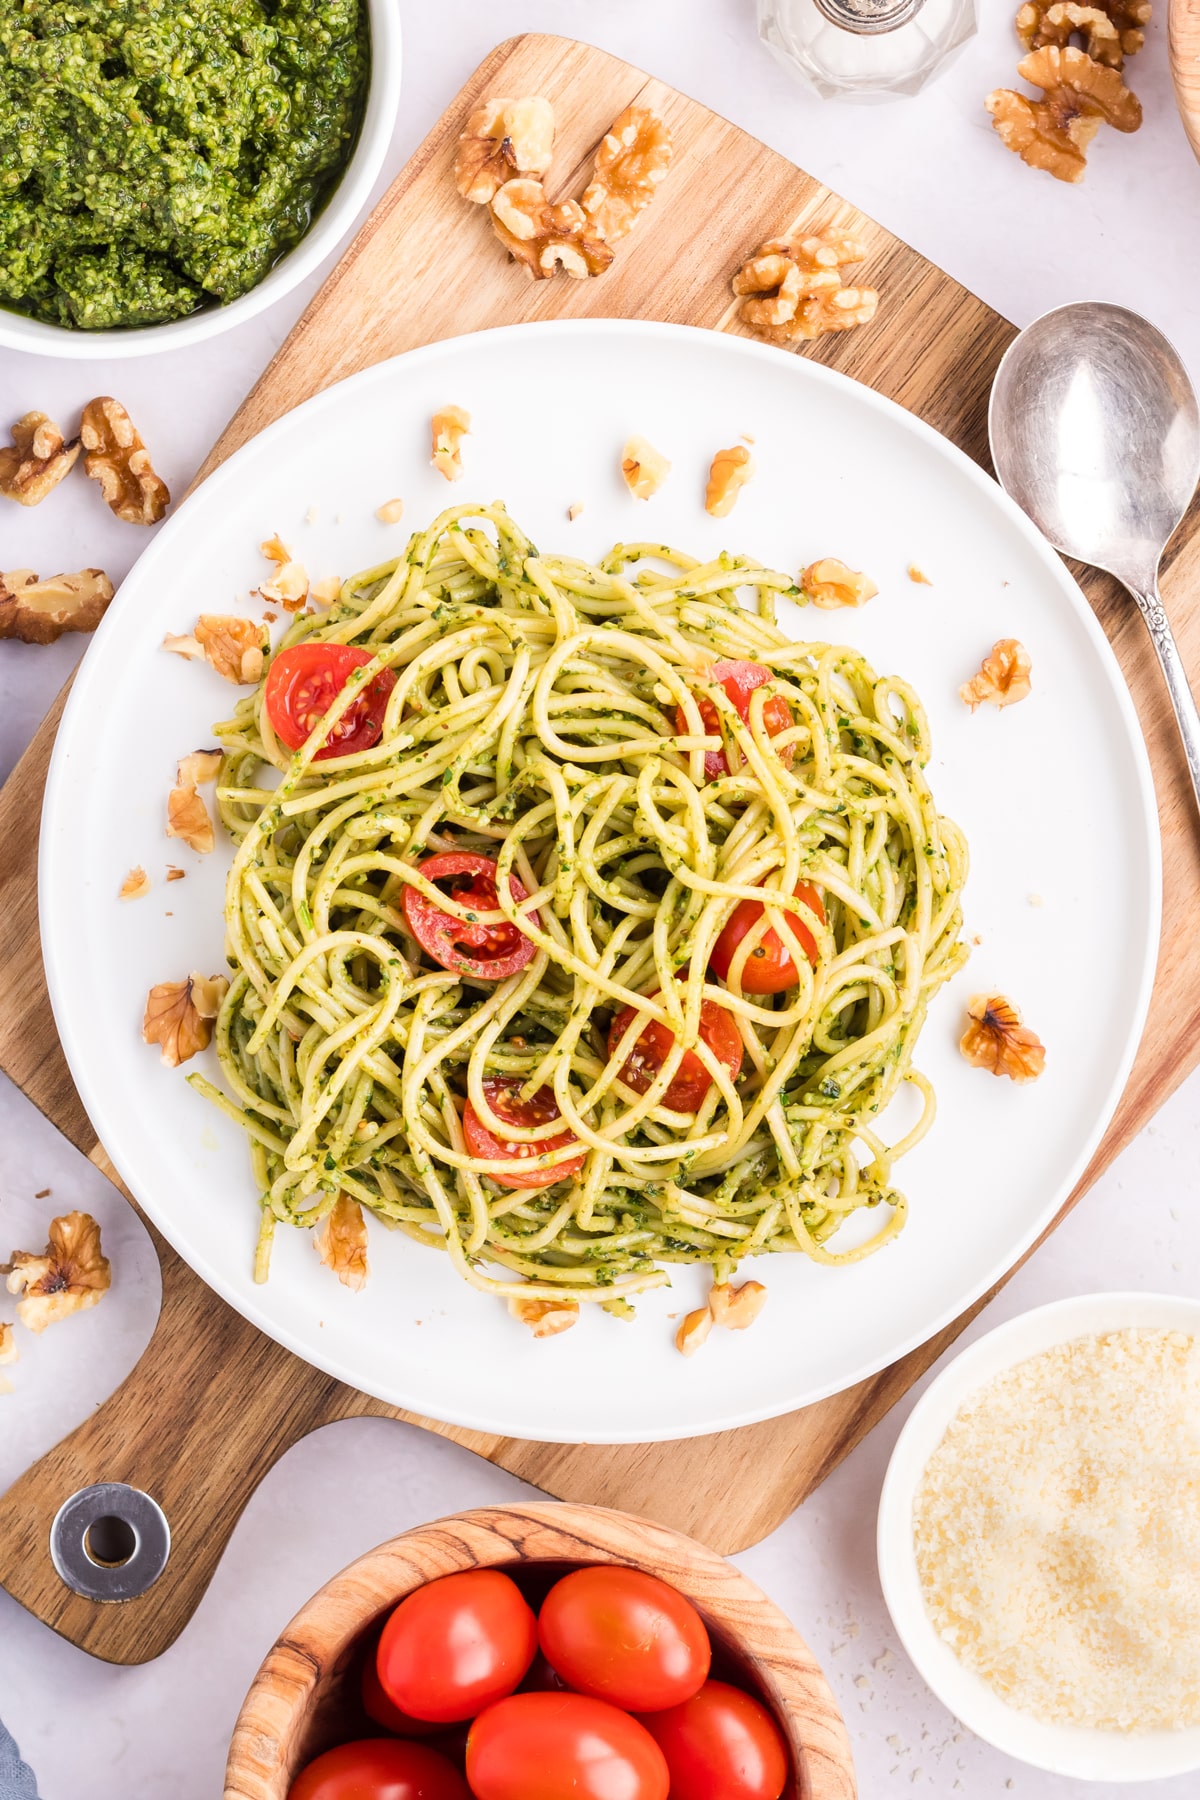 A plate of homemade pesto pasta with tomatoes and walnuts.